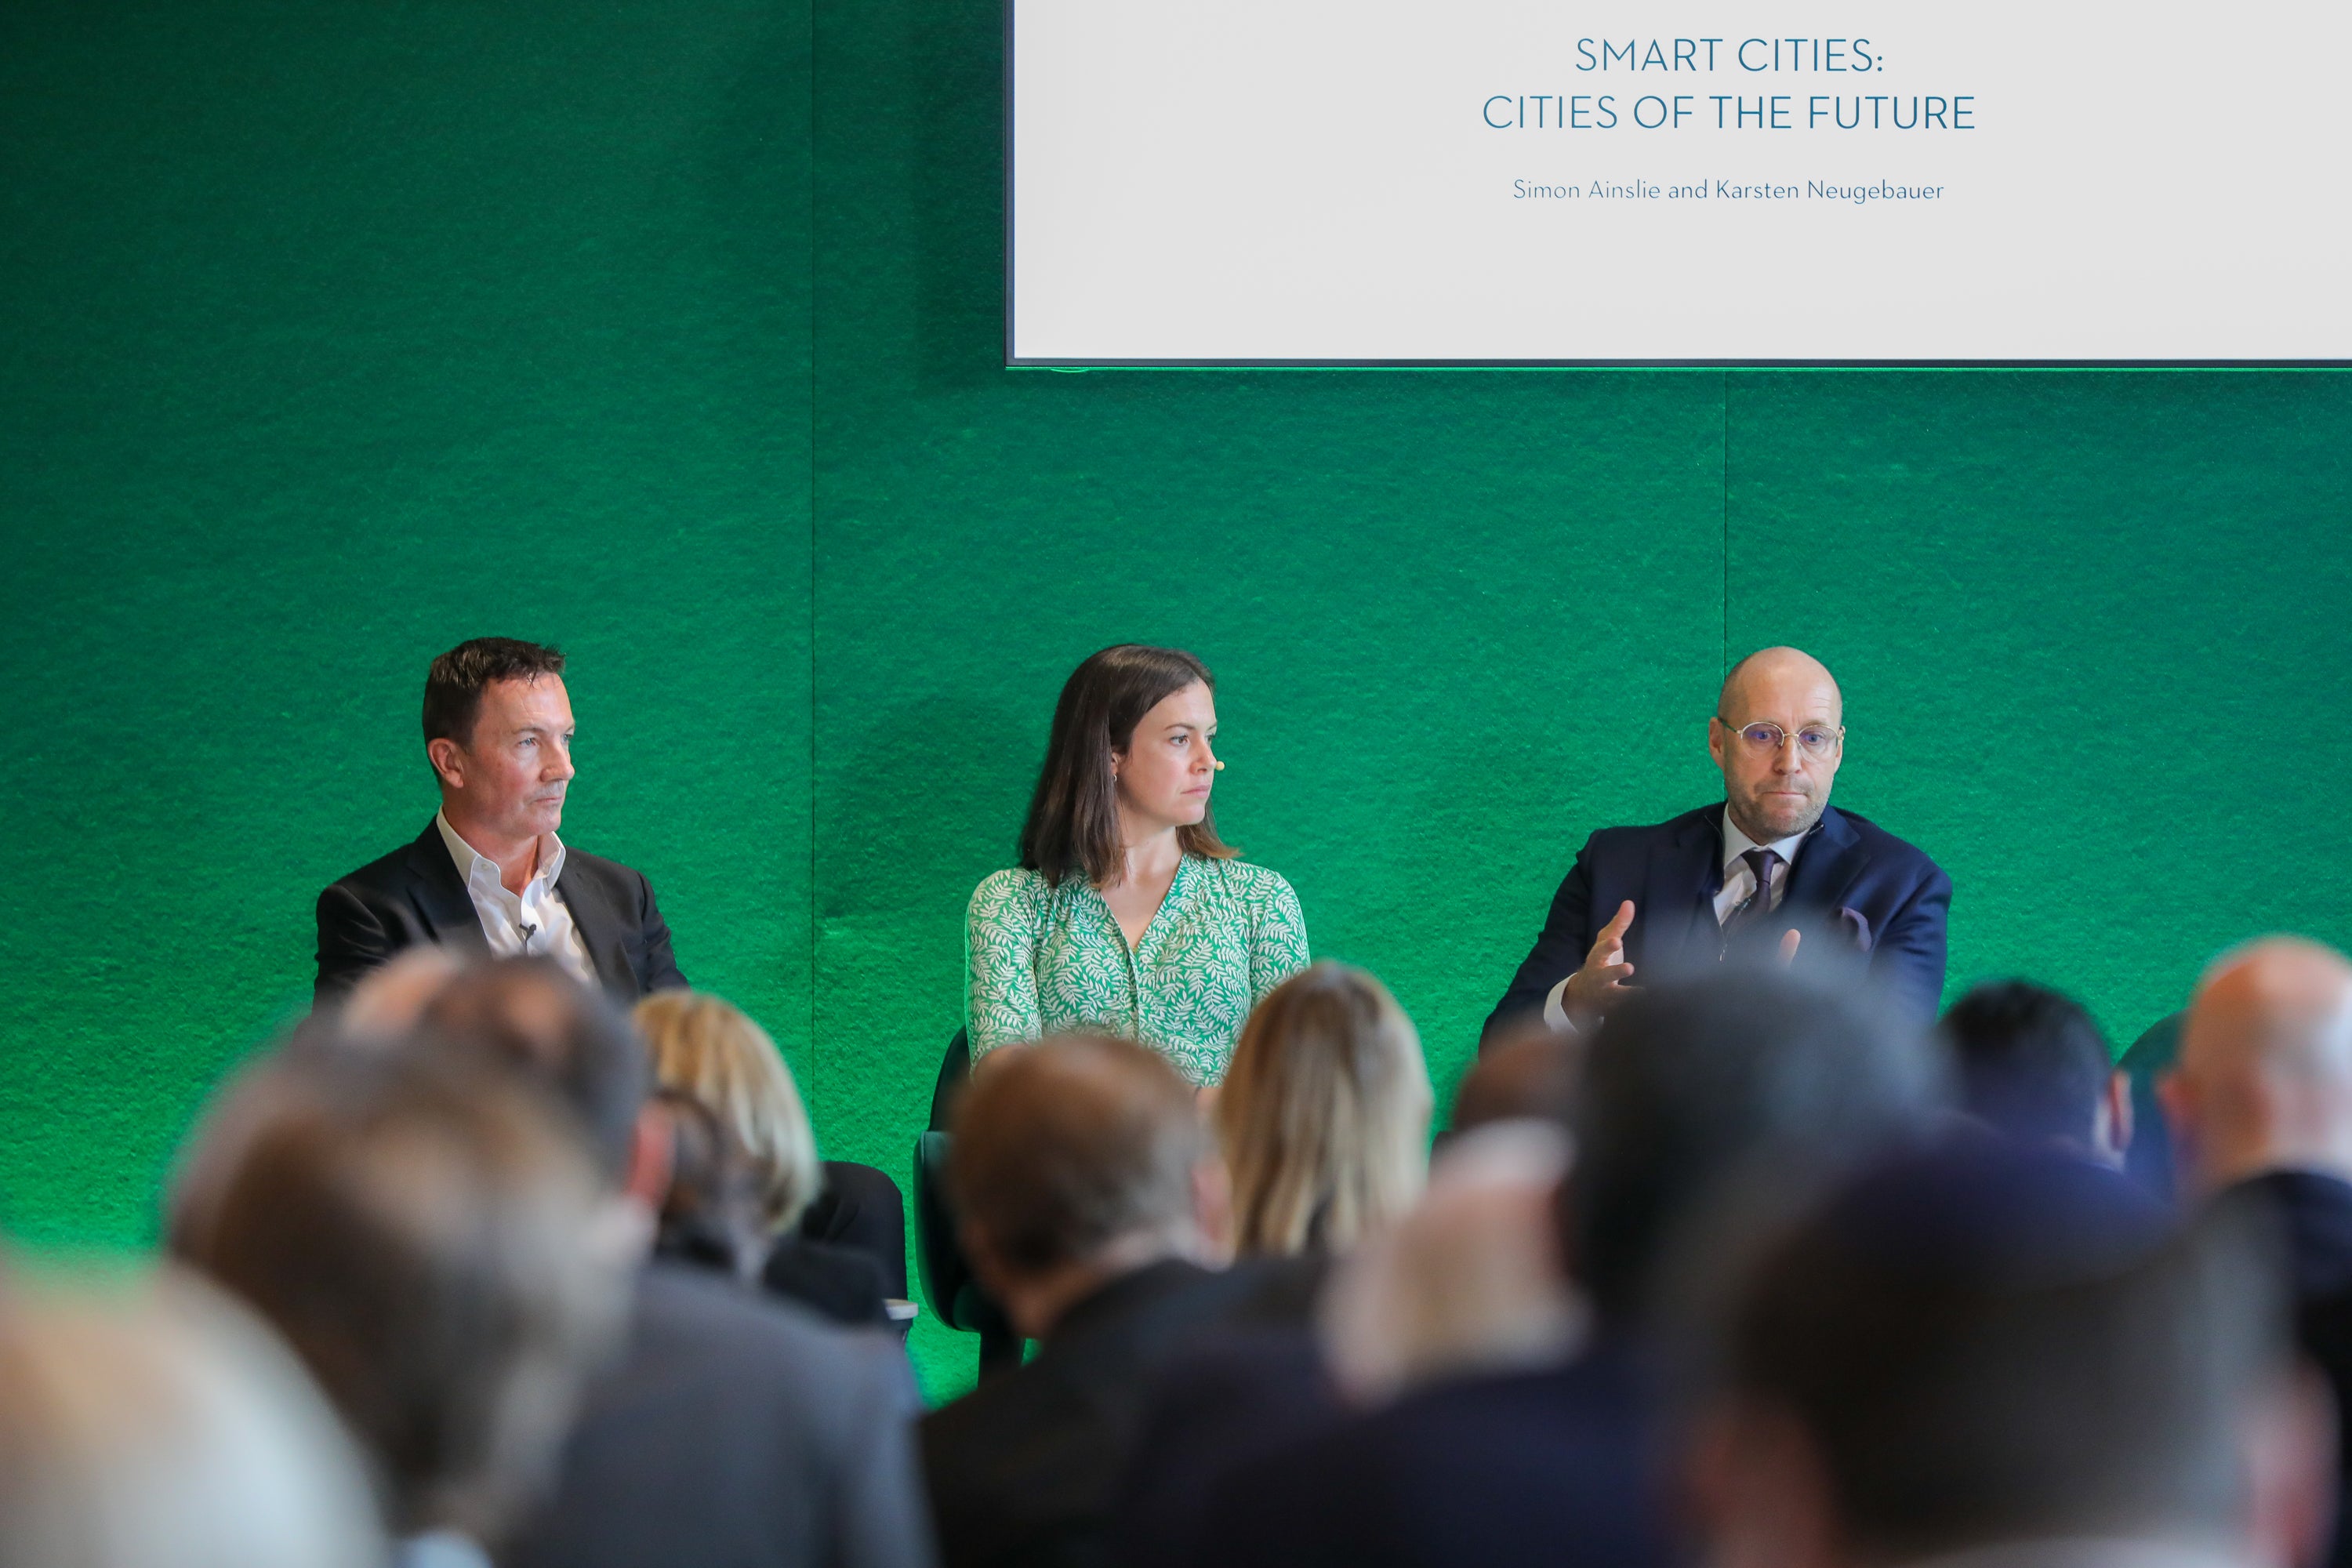 Simon Ainslie (left) and Karsten Neugebauer (right) discuss the future of urban living during a panel moderated by Isabel Hardman (centre) on smart cities at the Saudi Green Initiative London summit at Waddesdon Manor